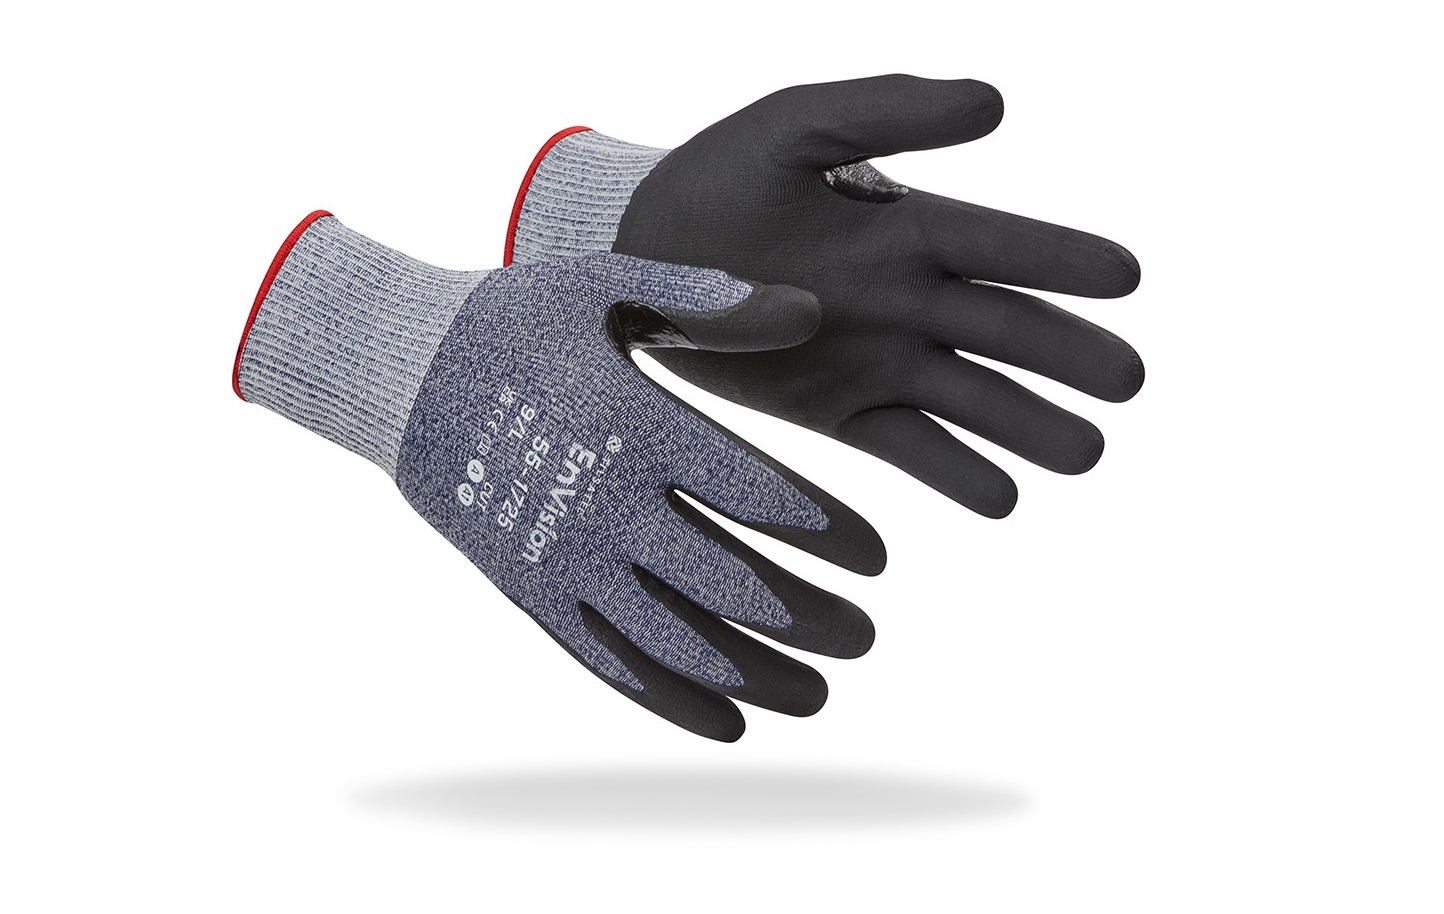 55-1725 - EnVision cut level A glove with micro foam coating